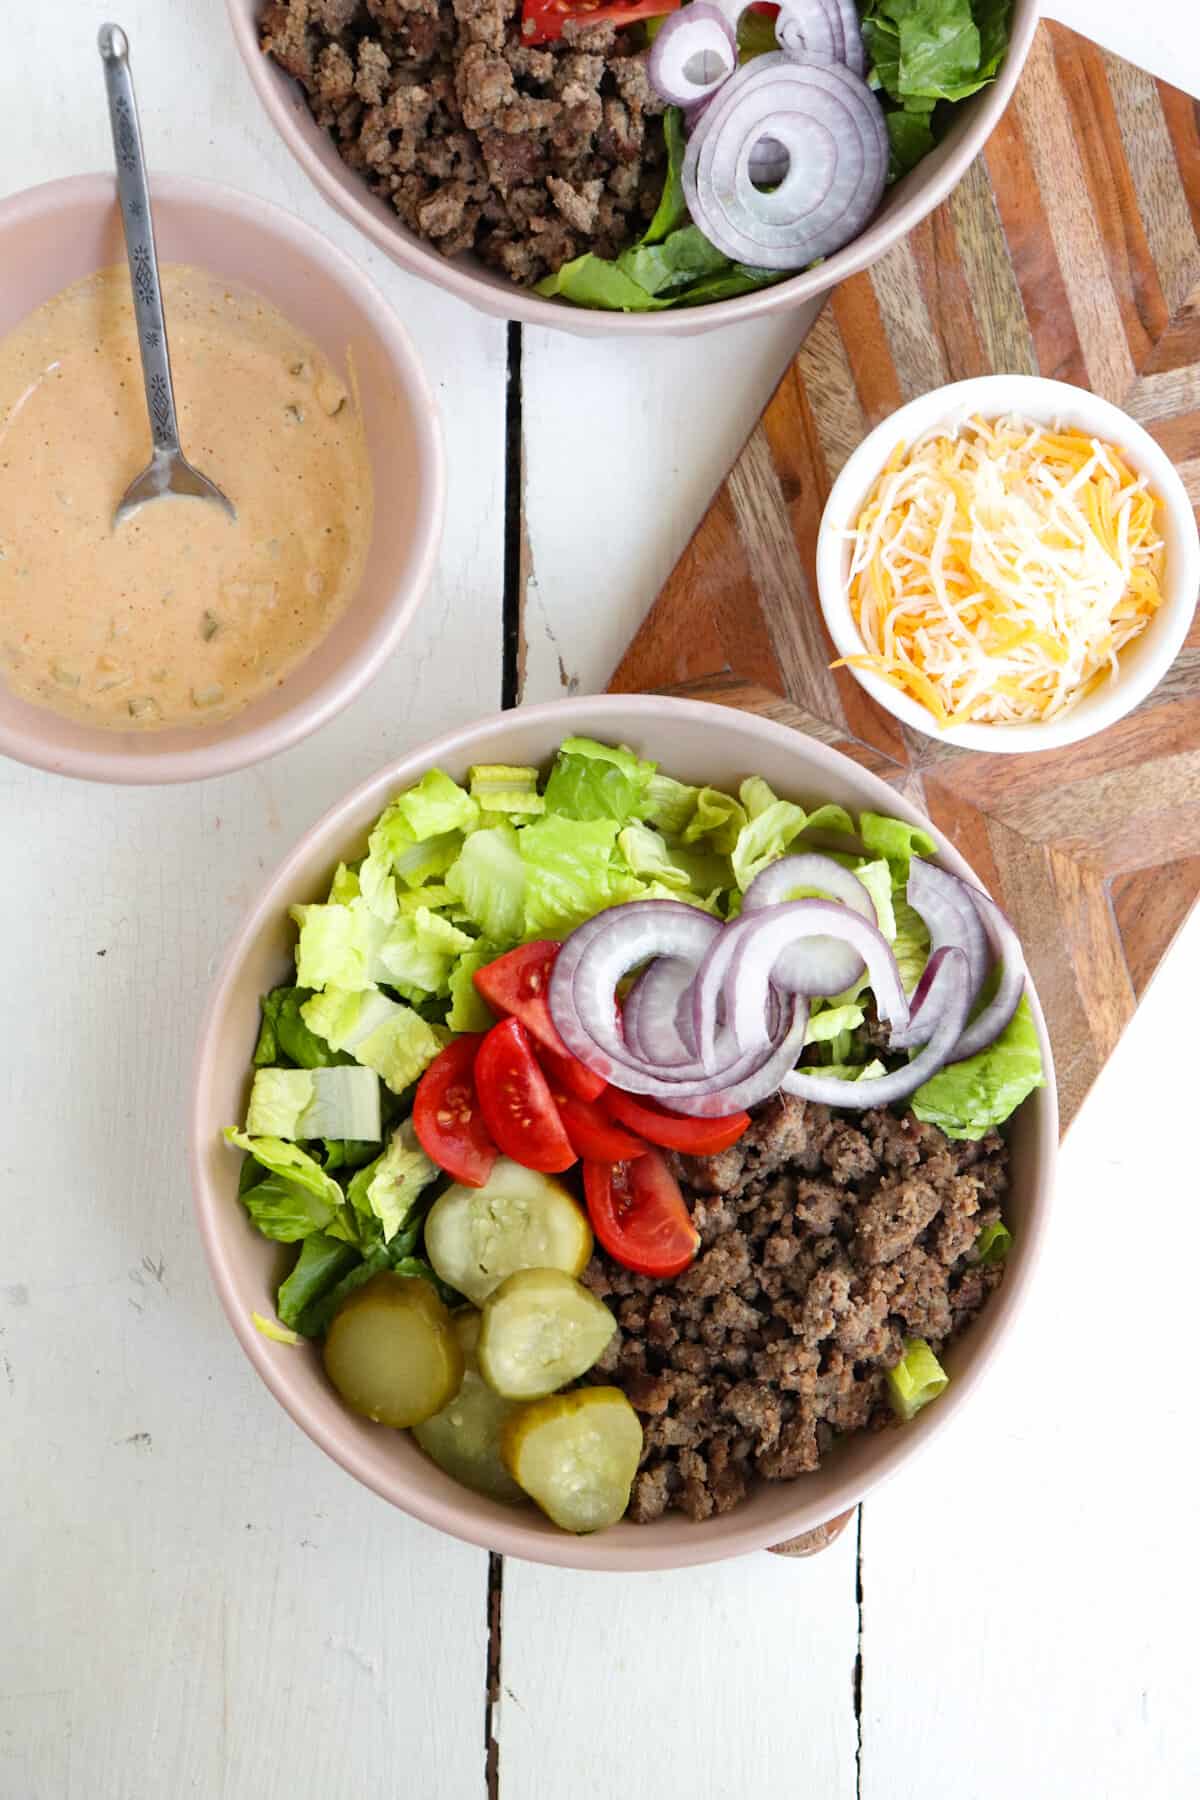 two ground beef burger bowls with sauce and cheese shown on the side.